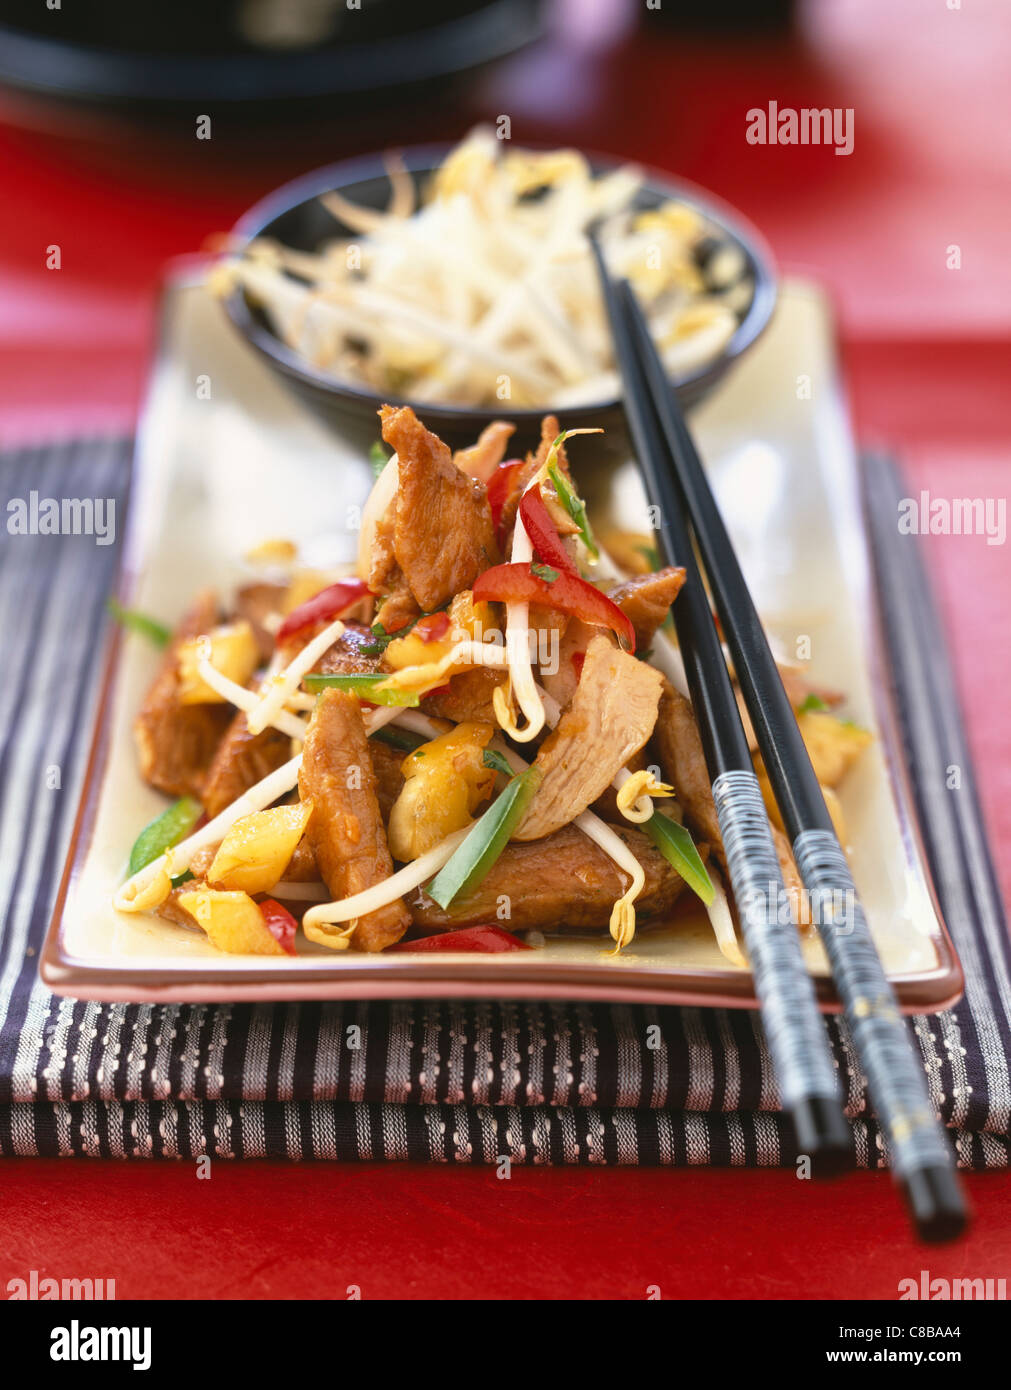 sauteed pork with vegetables Stock Photo